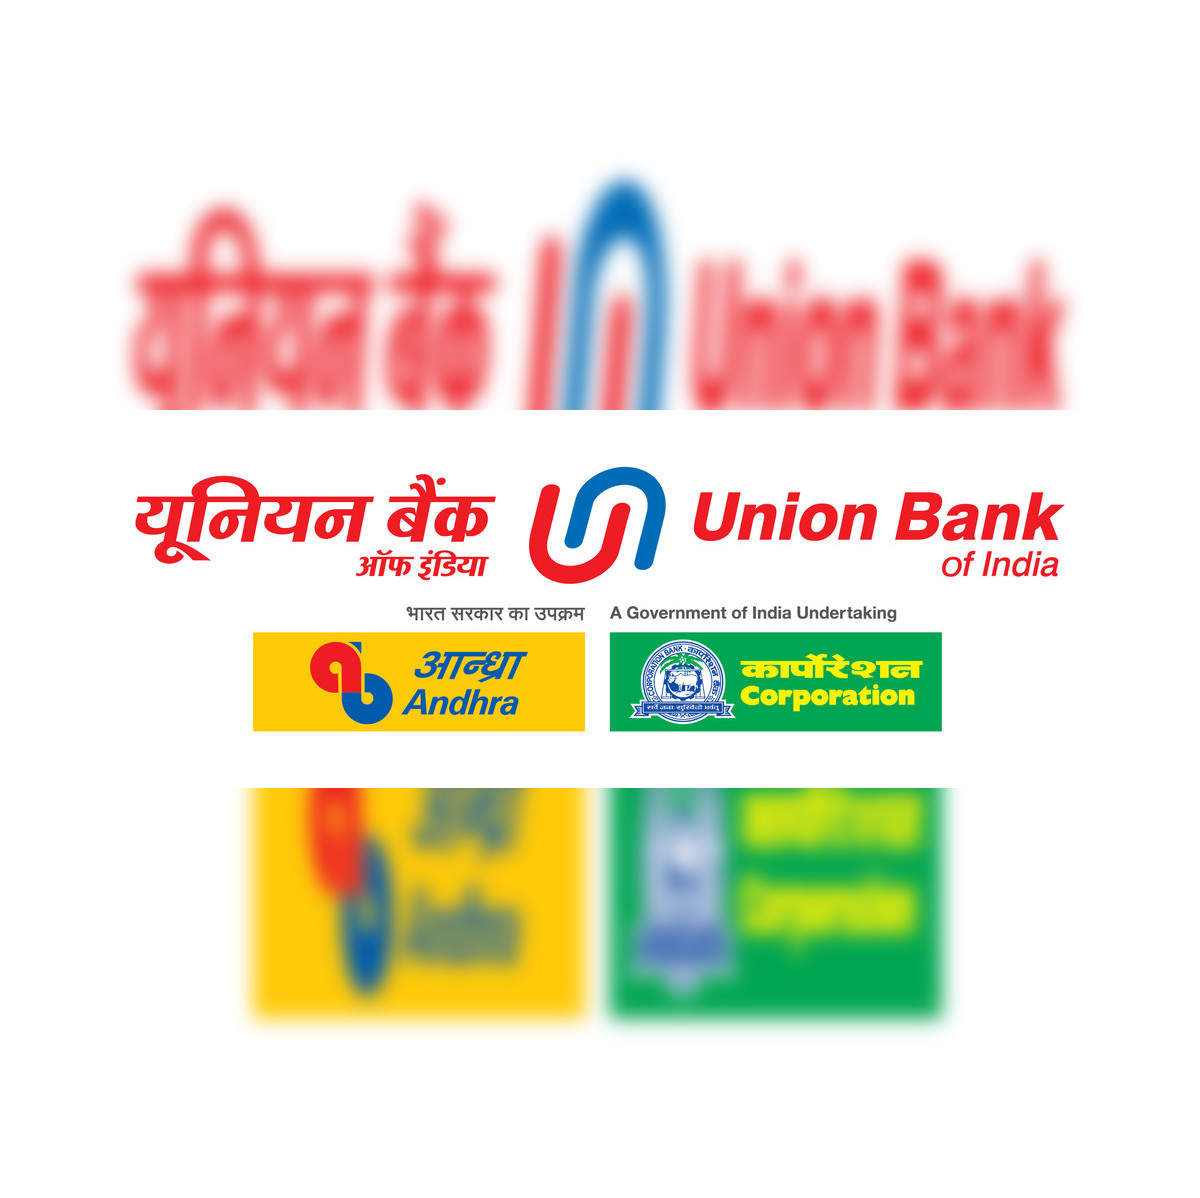 Union Bank of India Q1 results: Profit jumps 255% to Rs 1,181 crore despite  elevated provisions